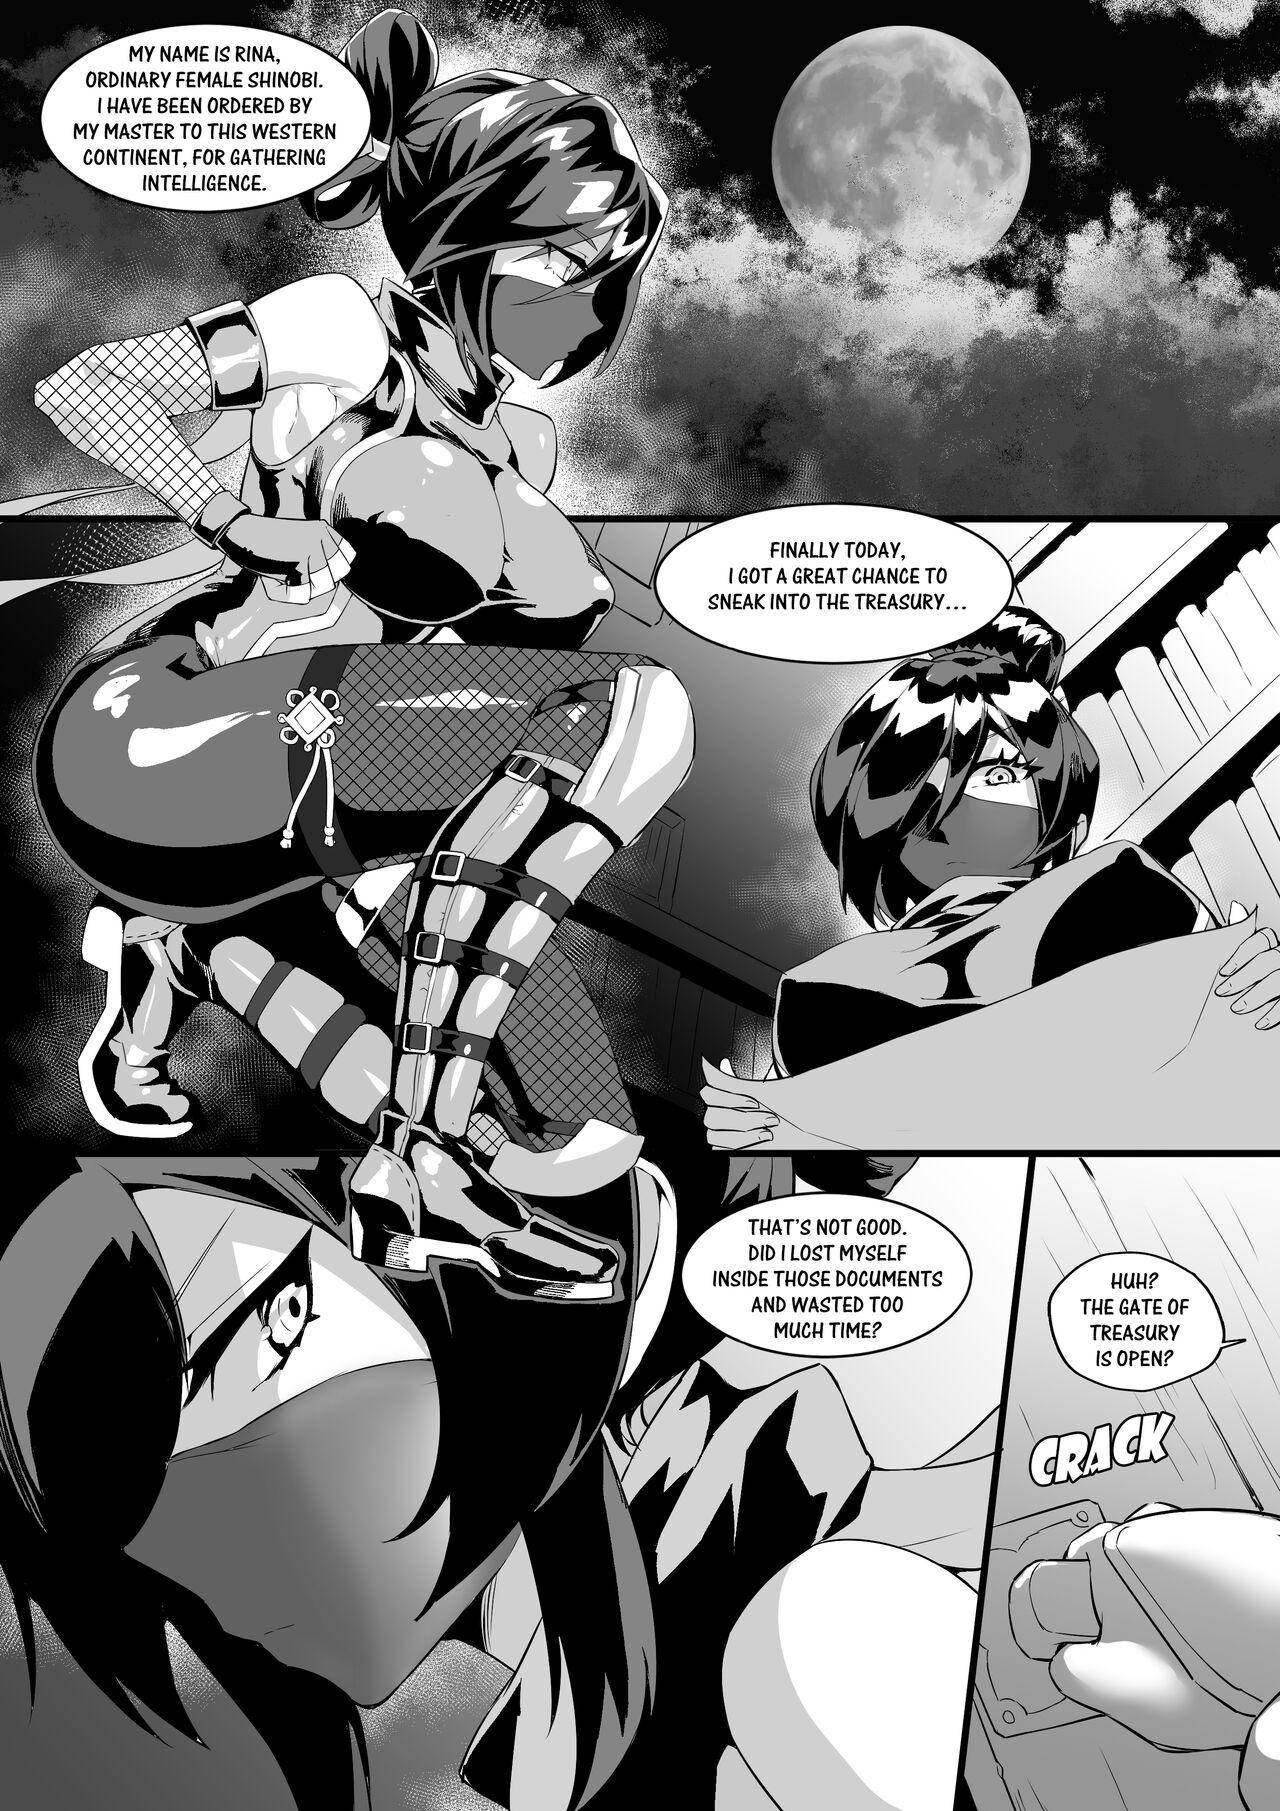 From Giant Shadow Looming Over Stealth in Eastern Style - Original Bra - Page 2